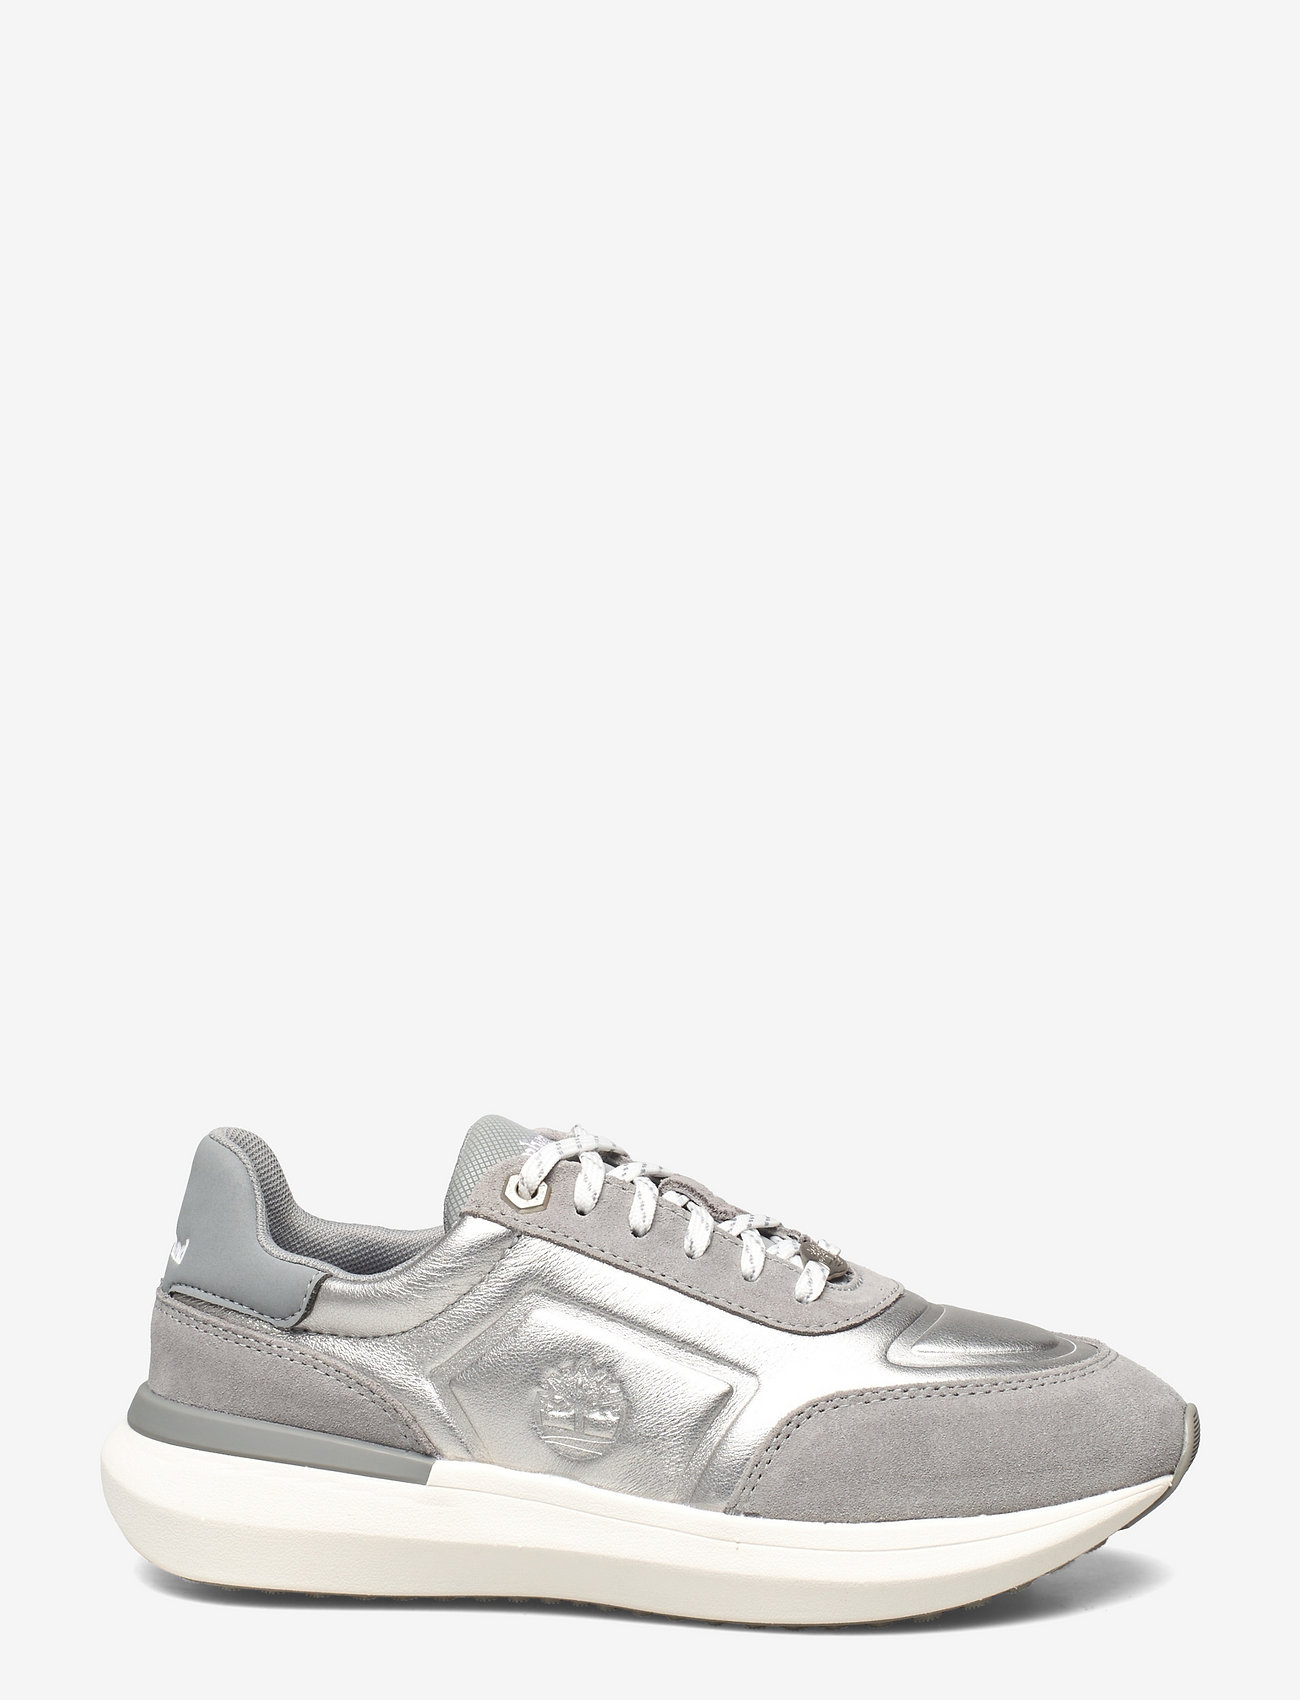 Timberland - Seoul City Leather Sneaker - sneakers med lavt skaft - silver - 1